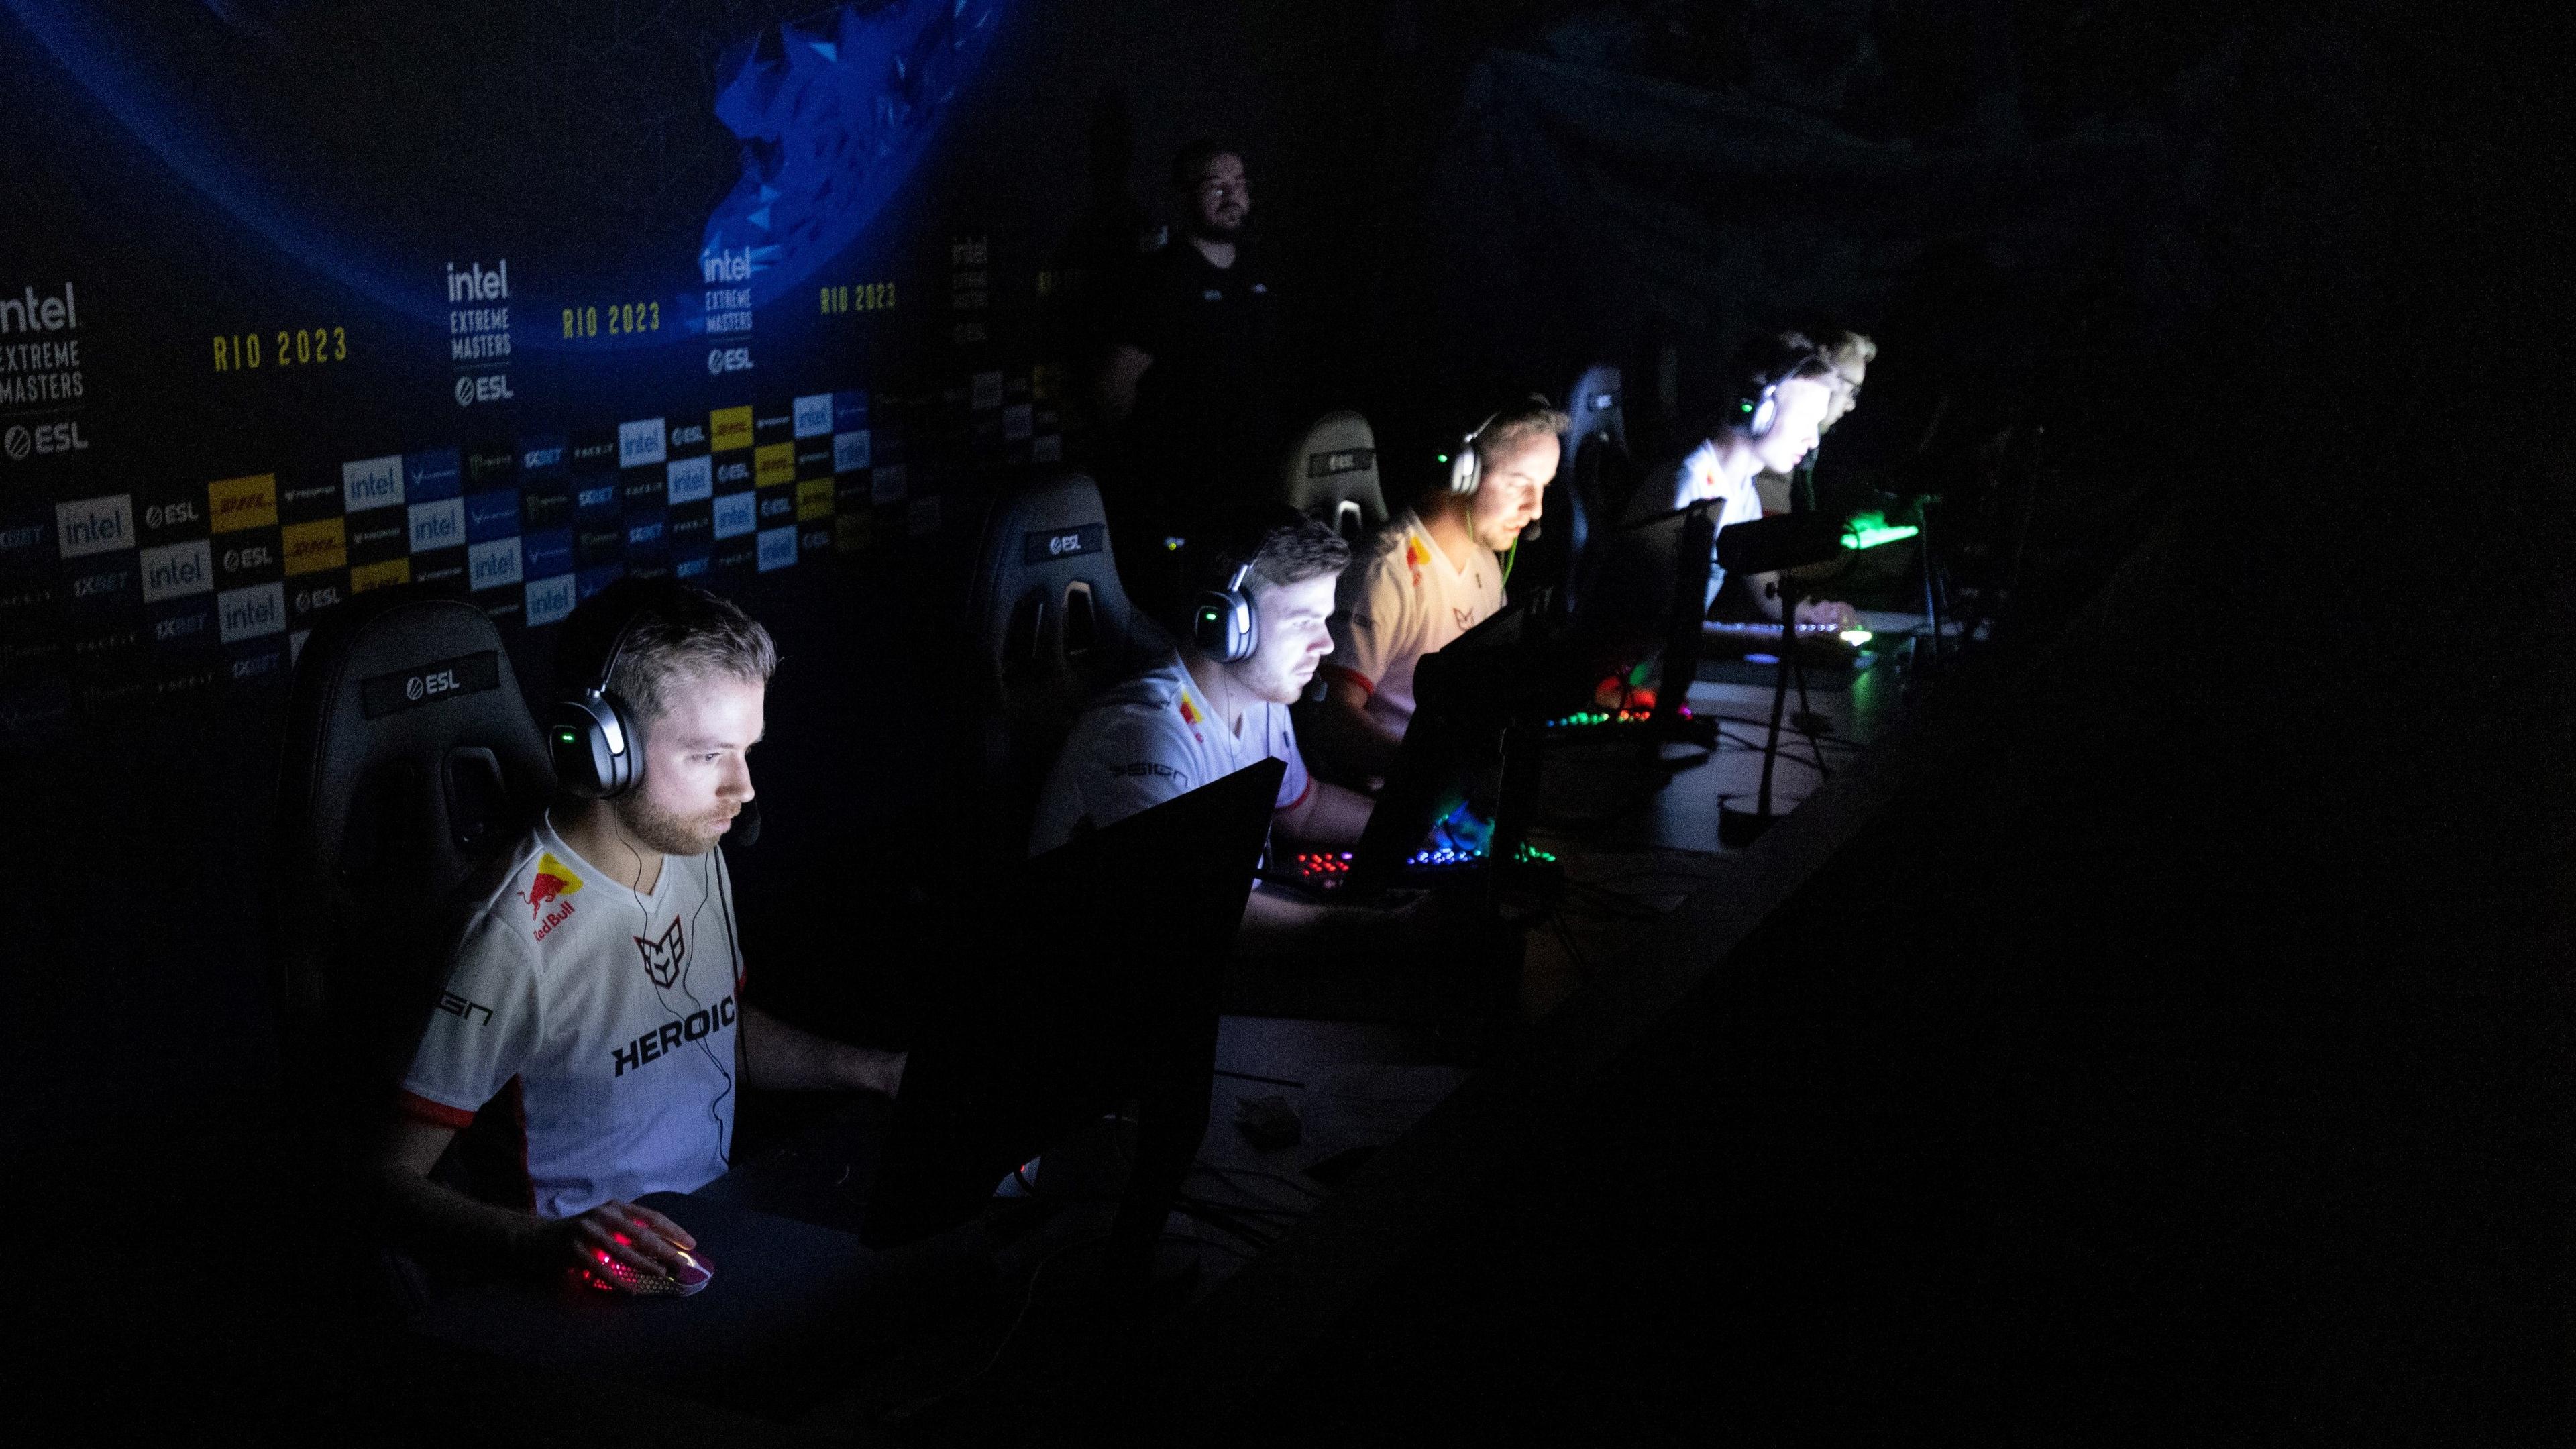 Heroic plays in the dark at IEM Rio 2023 after lighting fault